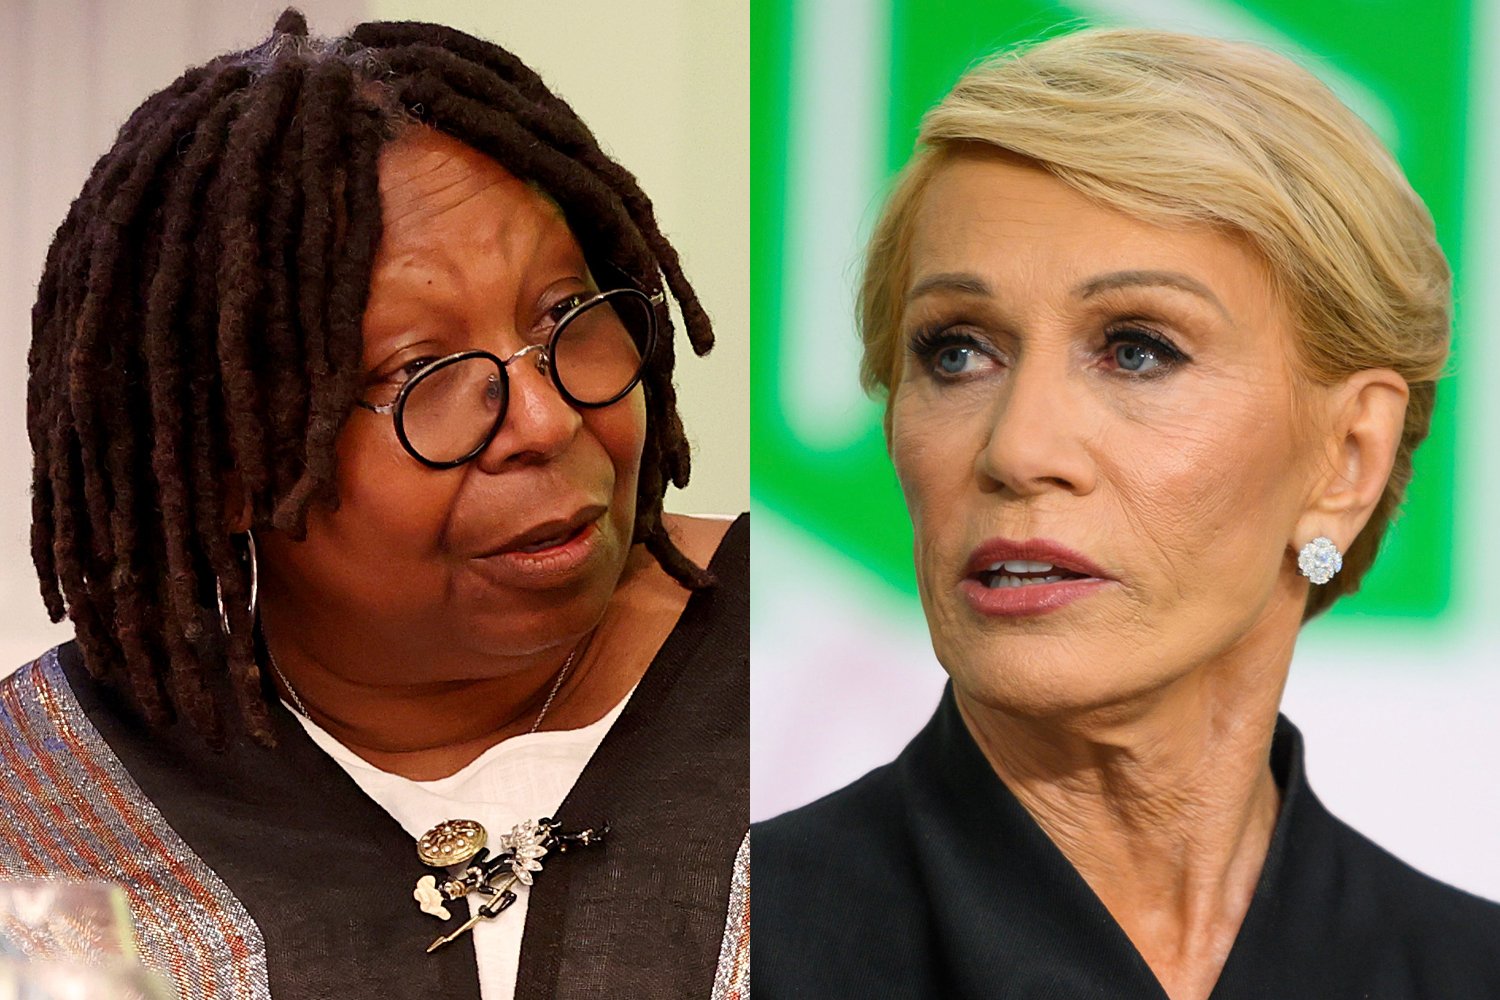 ‘Shark Tank’ Star Barbara Corcoran Apologizes to Whoopi Goldberg After Offensive Joke on ‘The View’